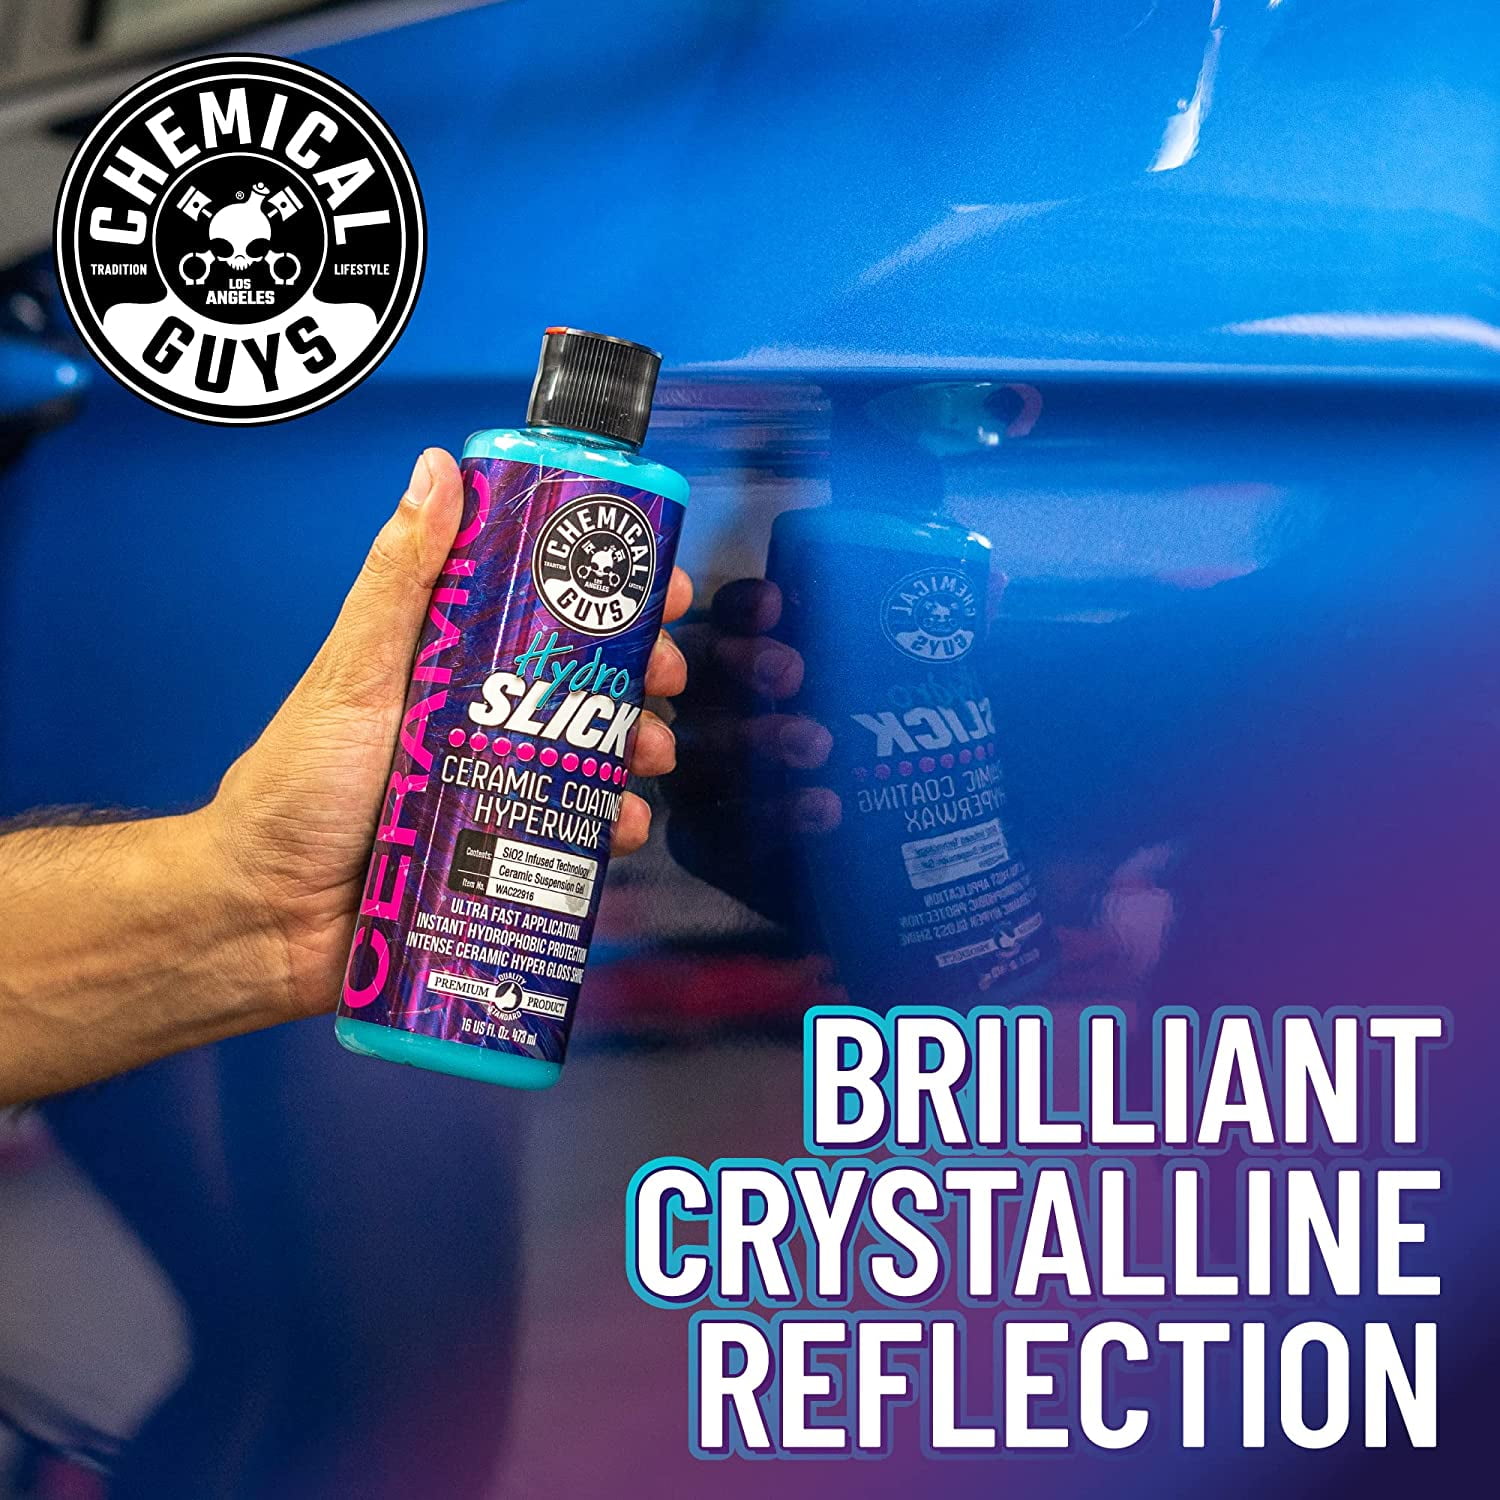 Chemical Guys HydroSuds, HydroSlick, HydroCharge, HydroSpin (16oz) Cer –  Detailing Connect